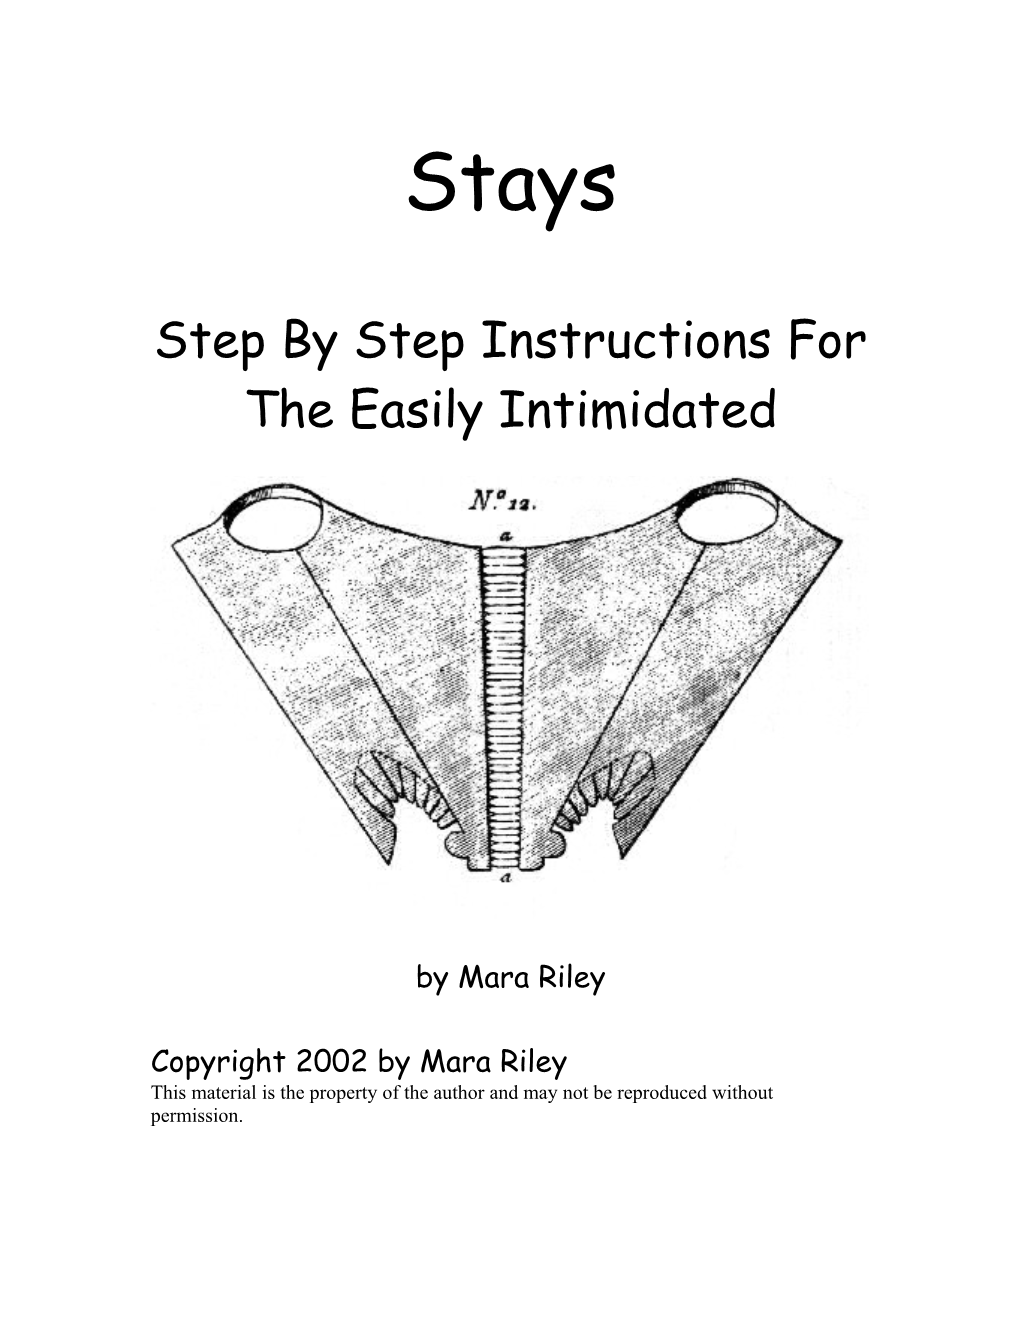 Step by Step Instructions For